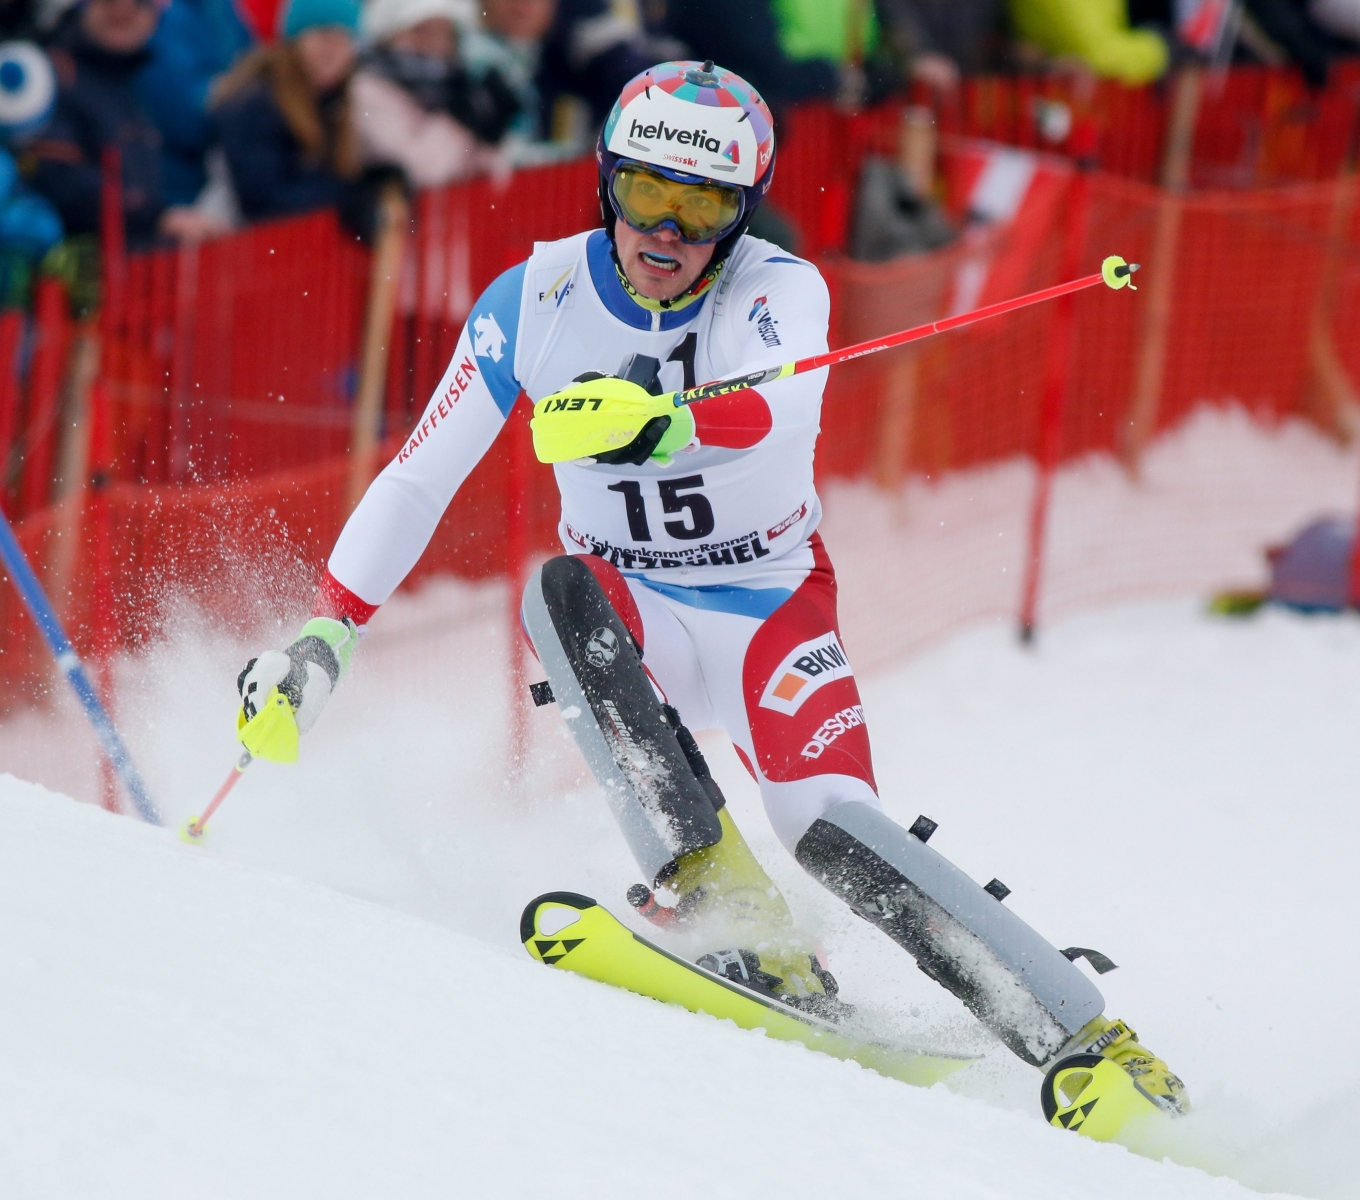 epa05122428 Daniel Yule of Switzerland clears a gate during the first run of the Men's Slalom race at the FIS Alpine Skiing World Cup  in Kitzbuehel, Austria, 24 January 2016.  EPA/EXPA / ERICH SPIESS AUSTRIA ALPINE SKIING WORLD CUP